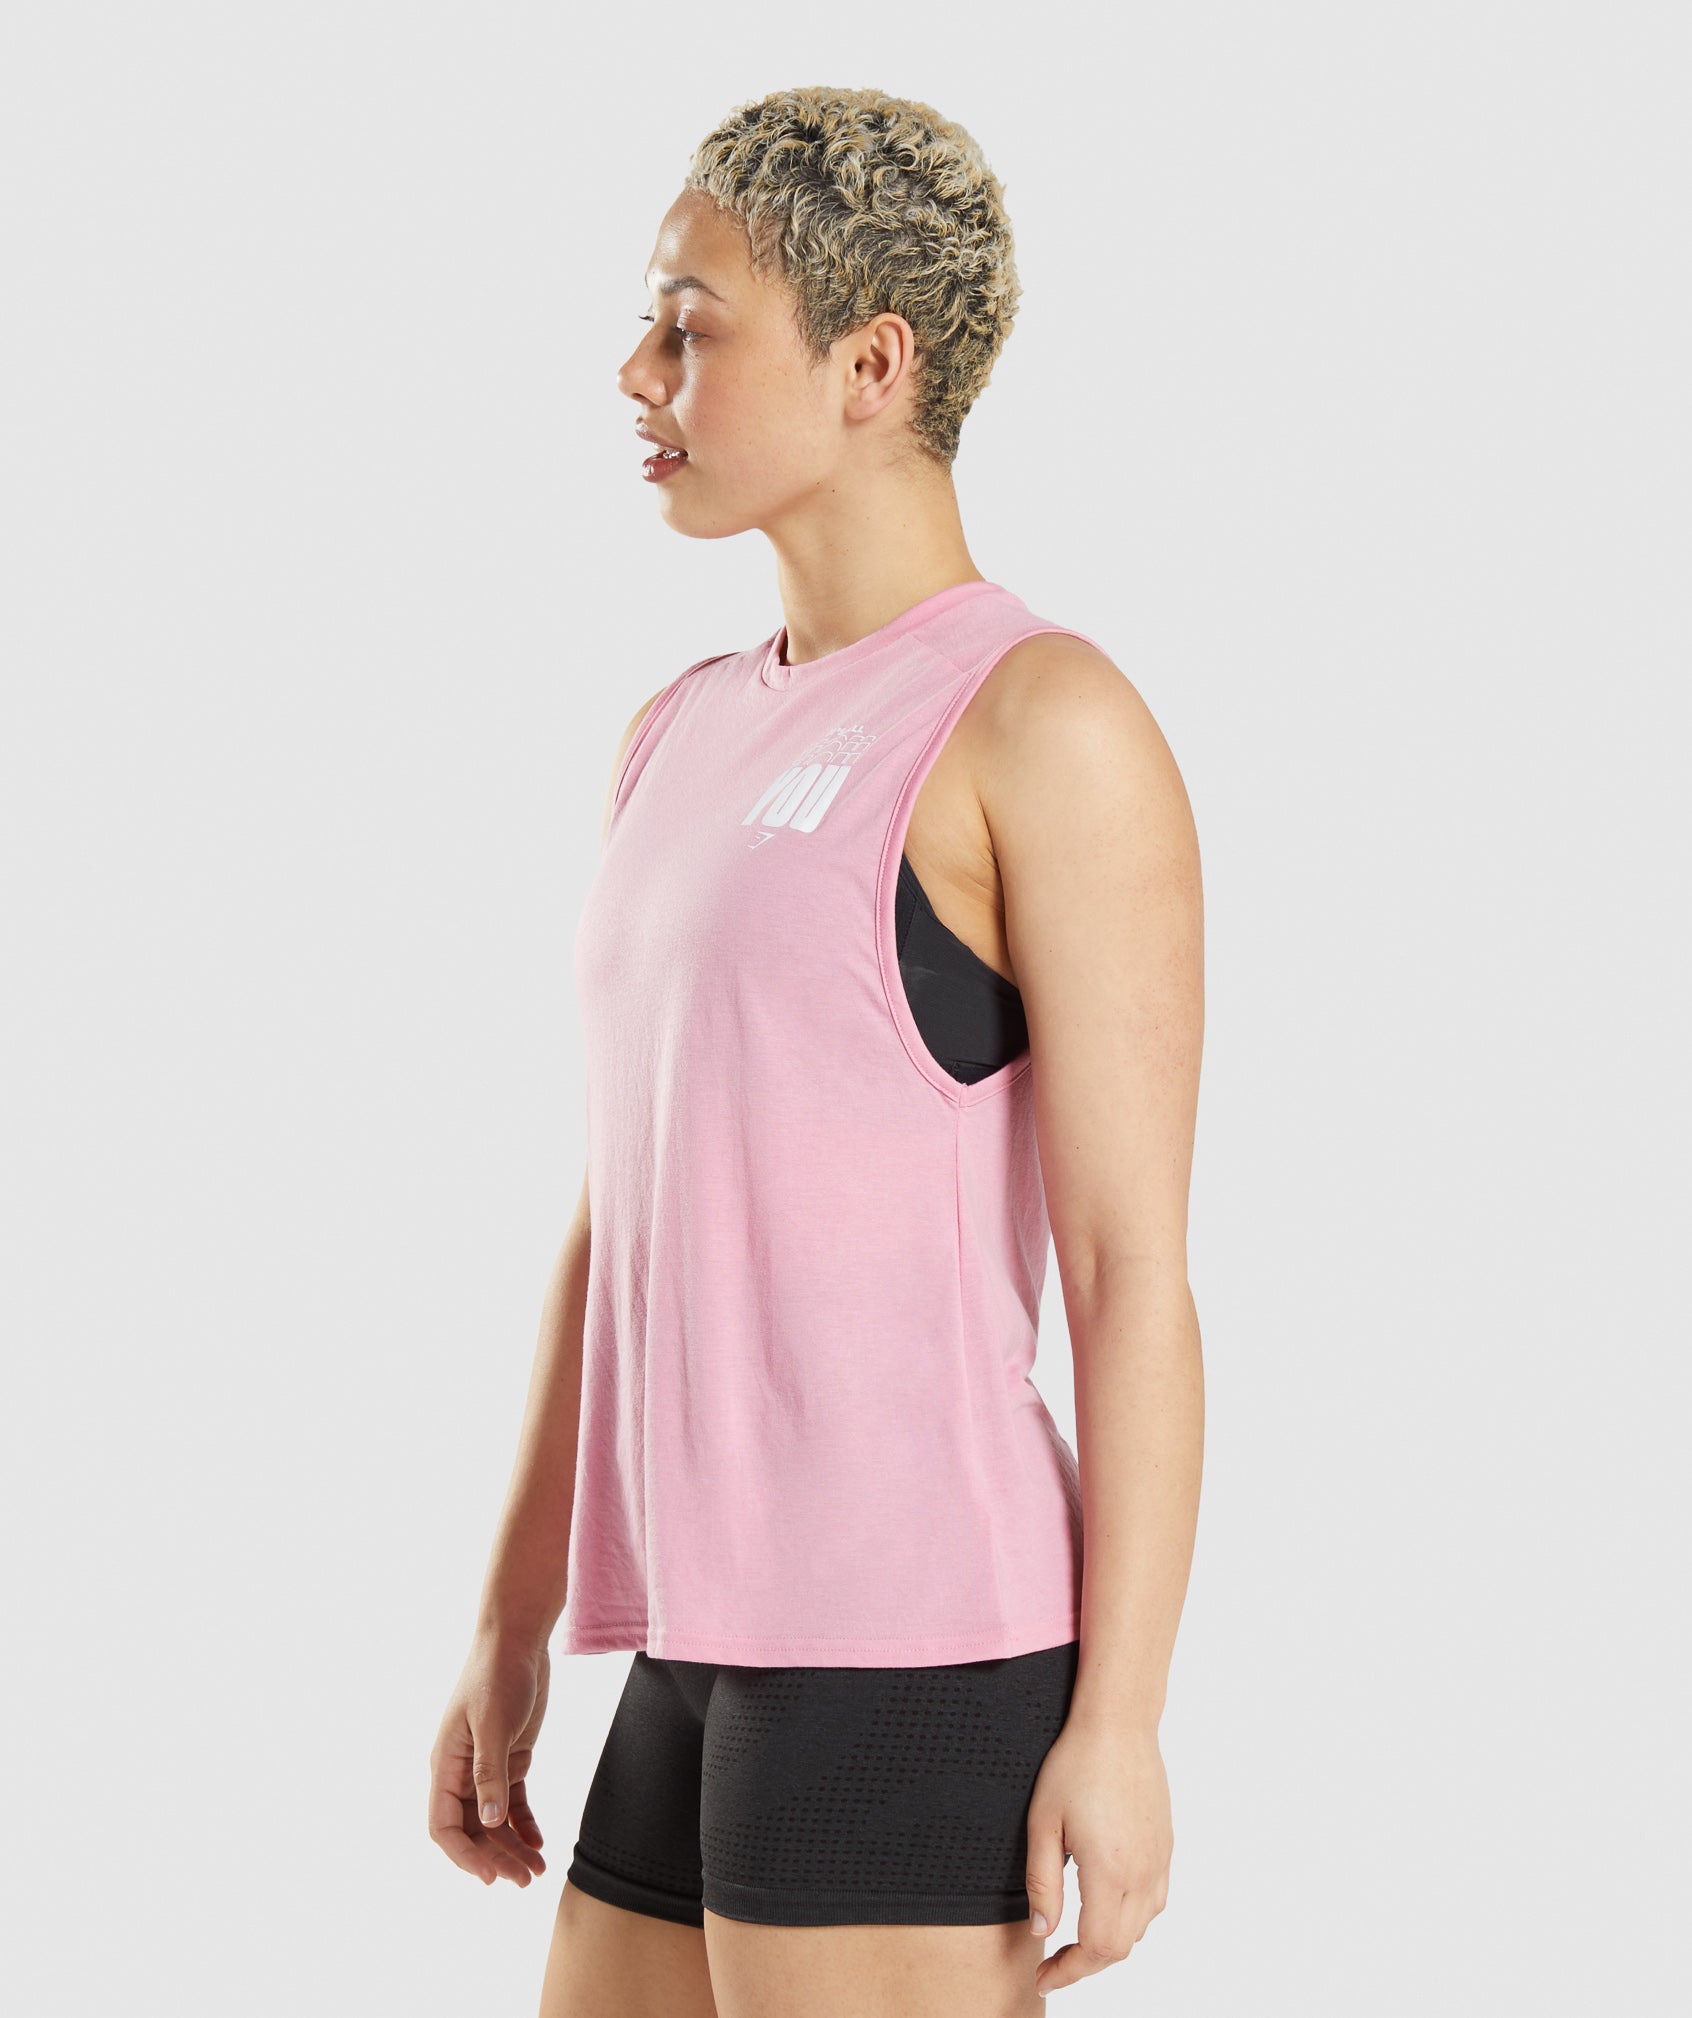 Its All You Drop Arm Tank in Sorbet Pink - view 3